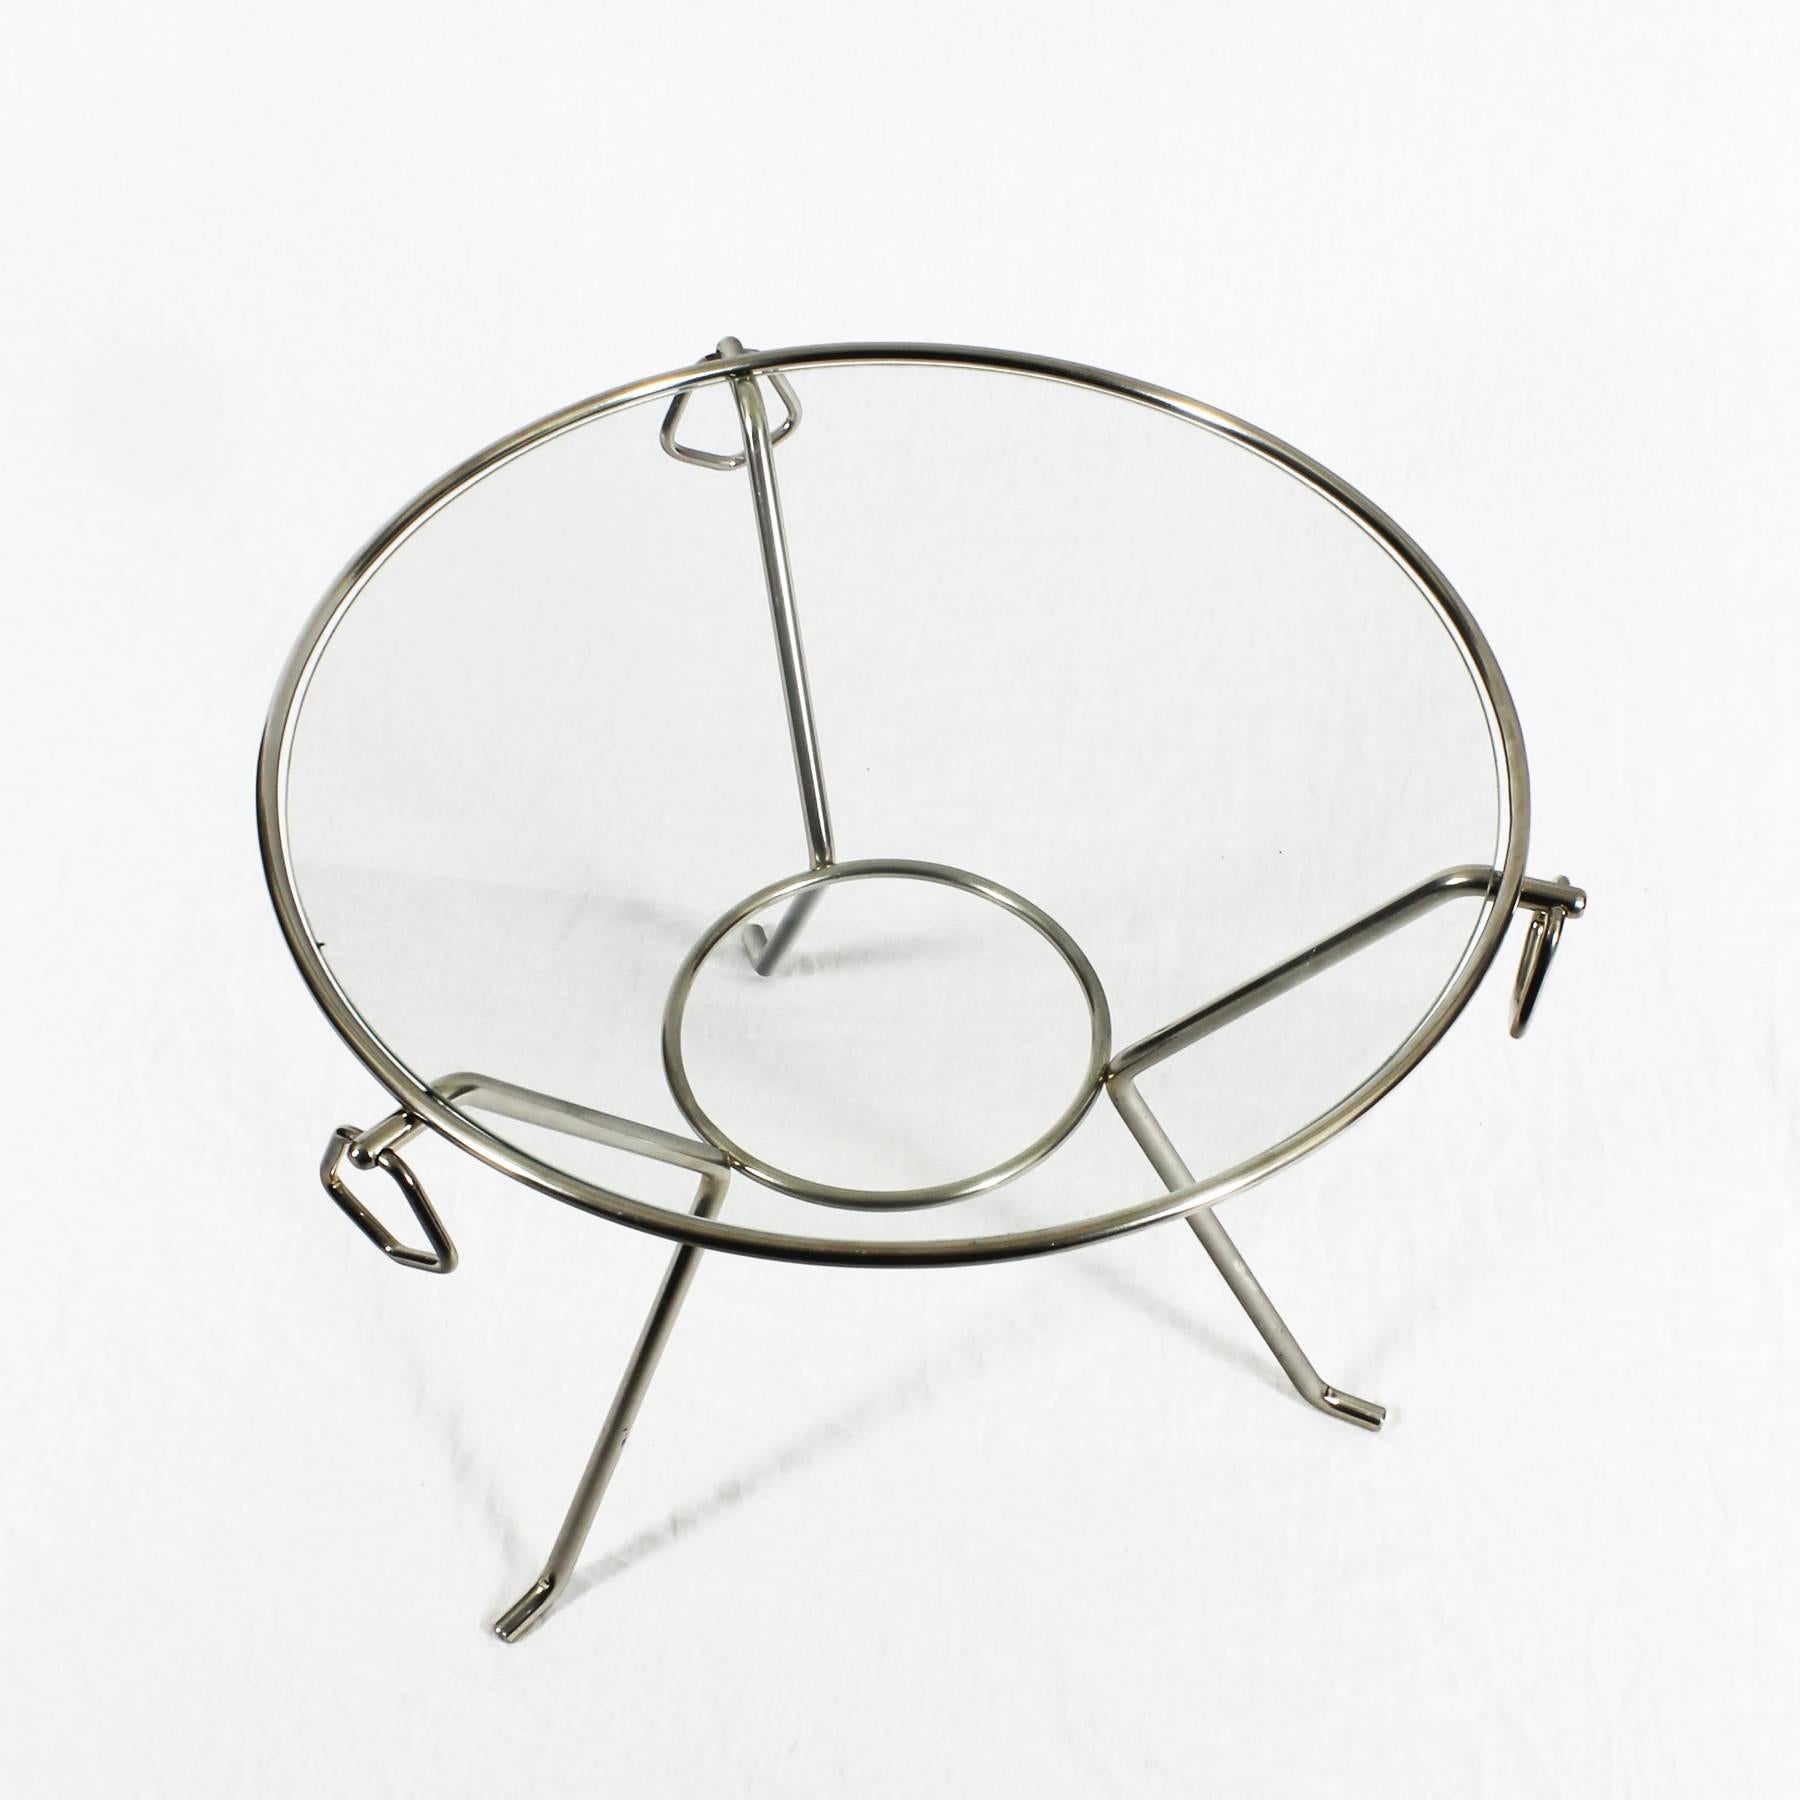 Mid-Century Modern SmallMid-Century Moder Tripod Table, Nickel Plated Brass, Glass, Rings - France For Sale